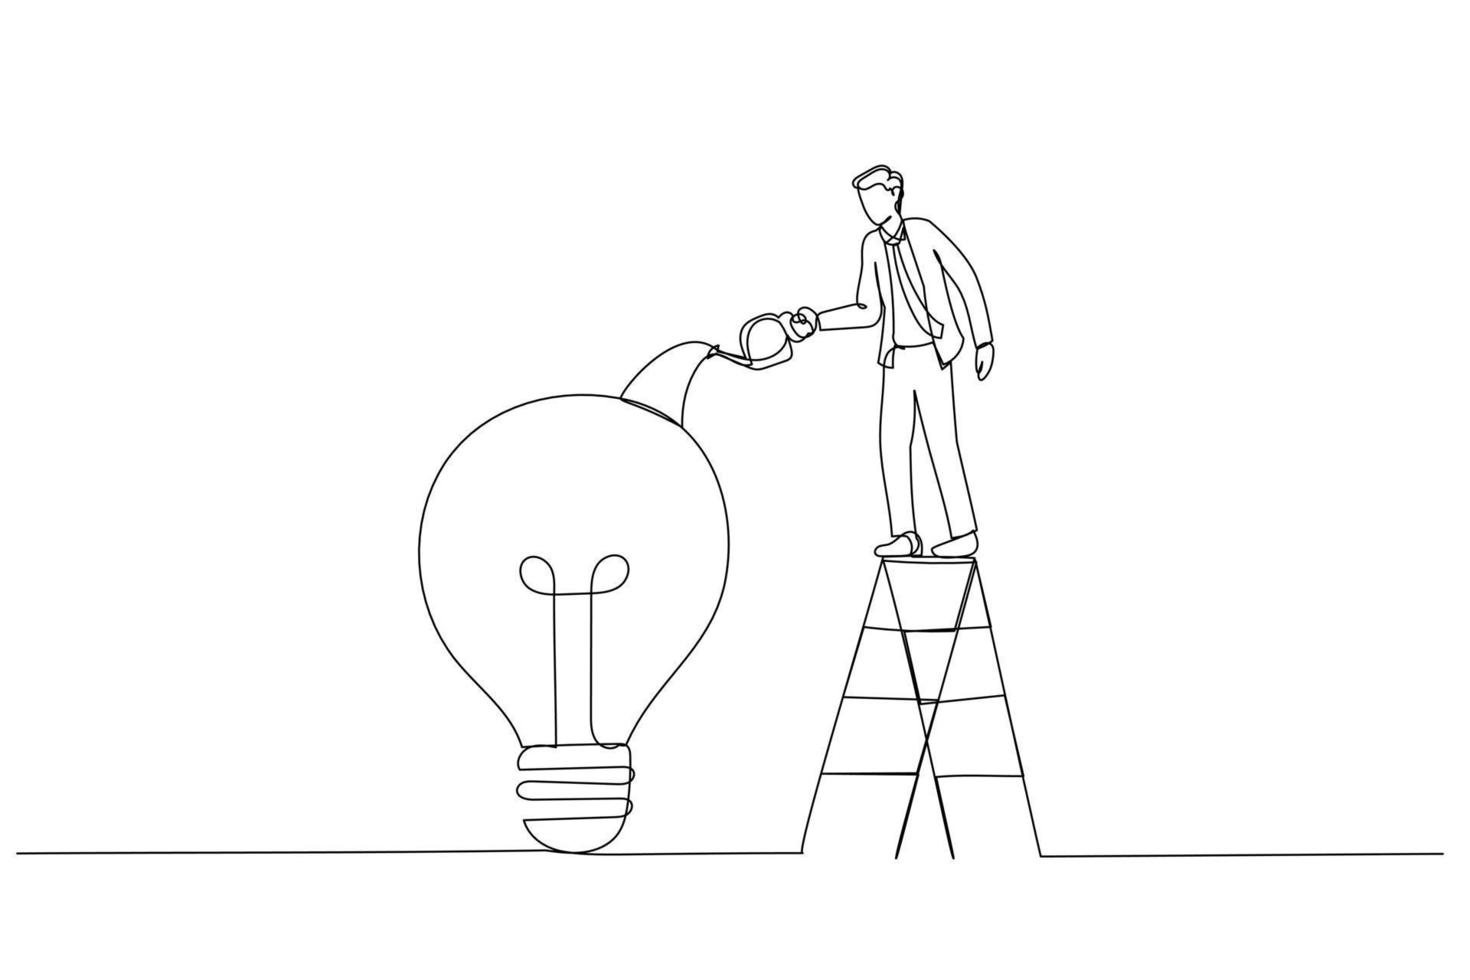 Illustration of businessman drop lubricant or grease into mechanical gears lightbulb  concept of creativity. Single continuous line art style vector